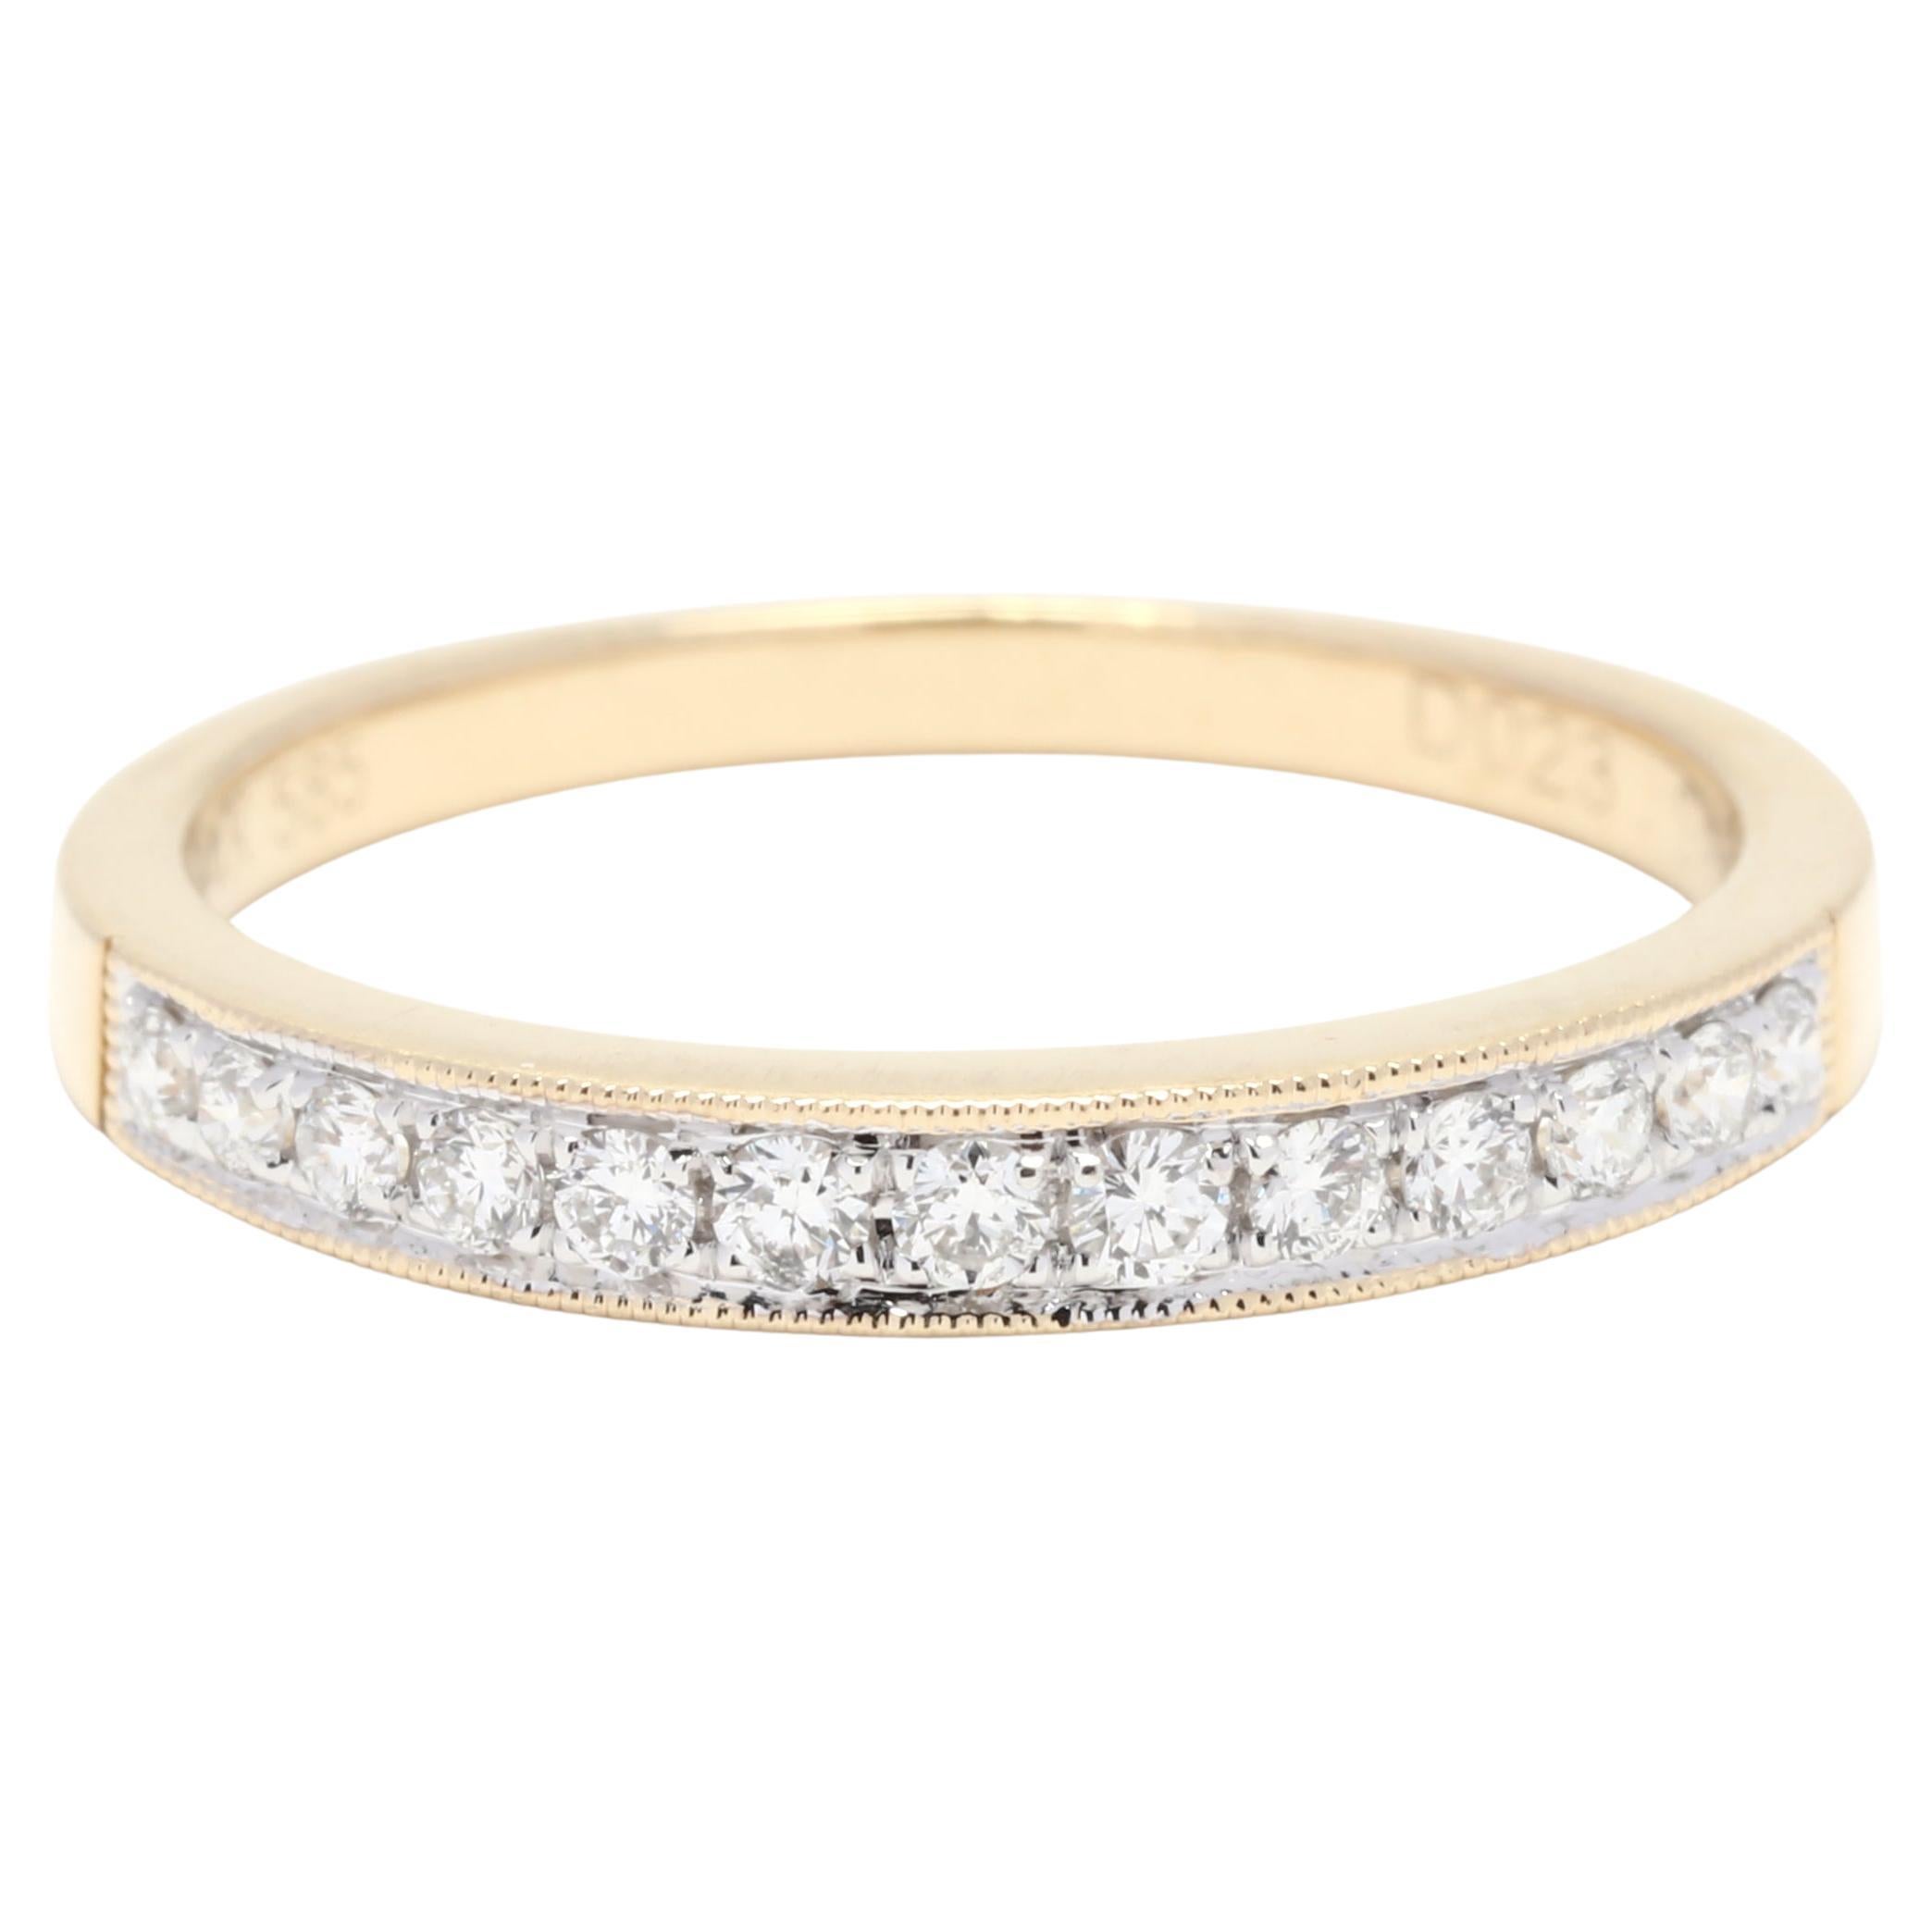 0.23ctw Thin Diamond Wedding Band, 14K Yellow Gold, Ring Size 6.5, Stackable